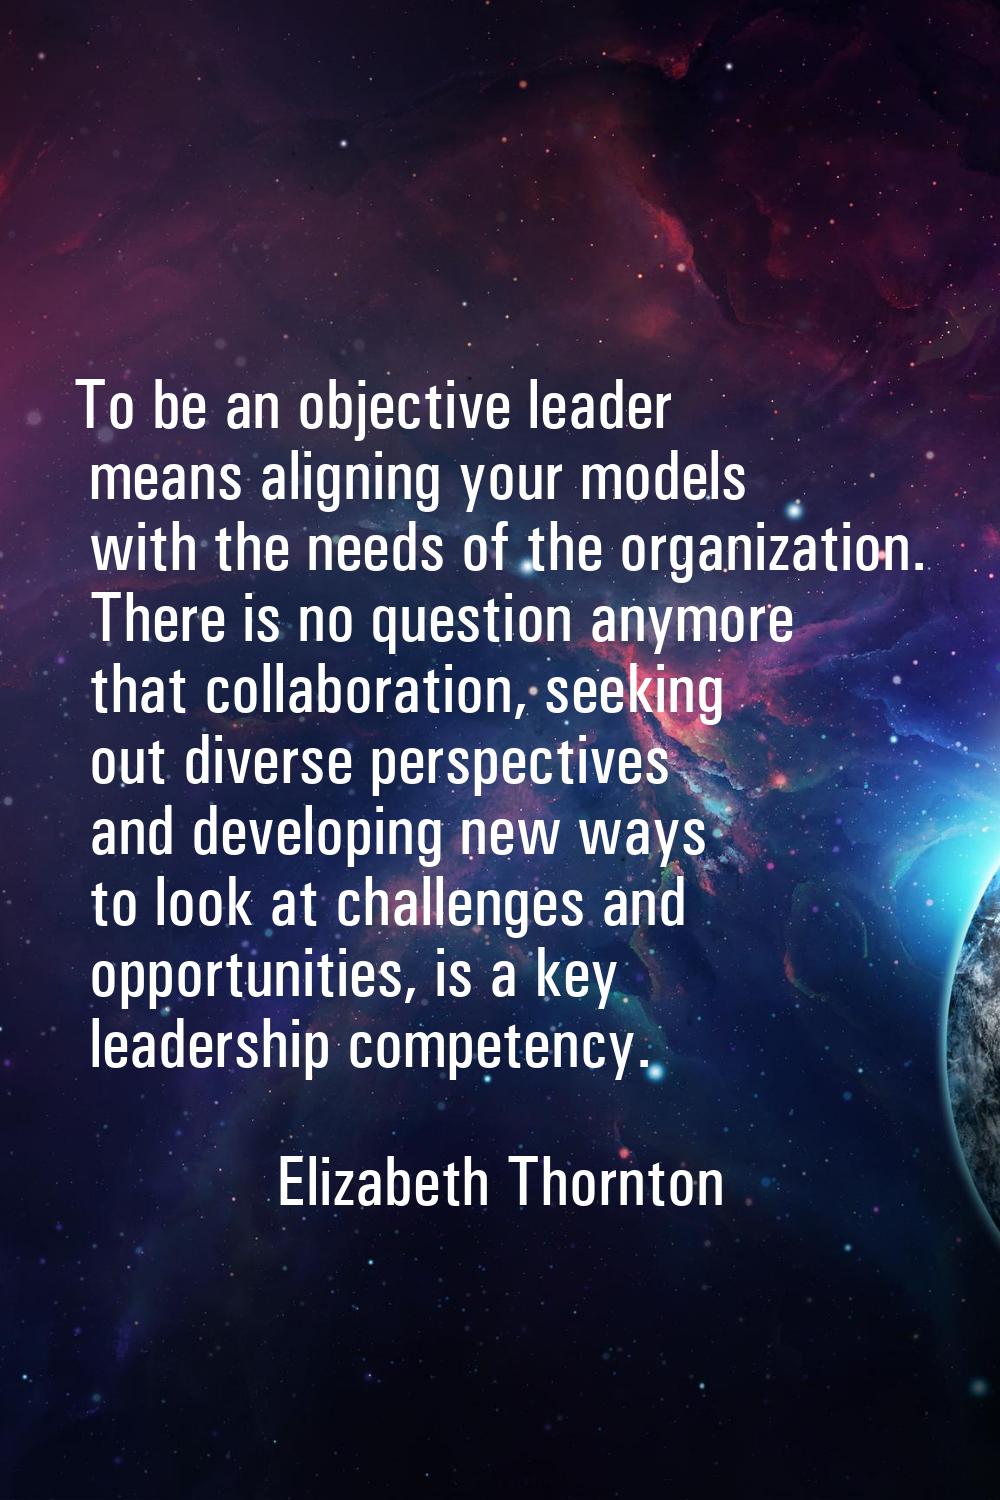 To be an objective leader means aligning your models with the needs of the organization. There is n